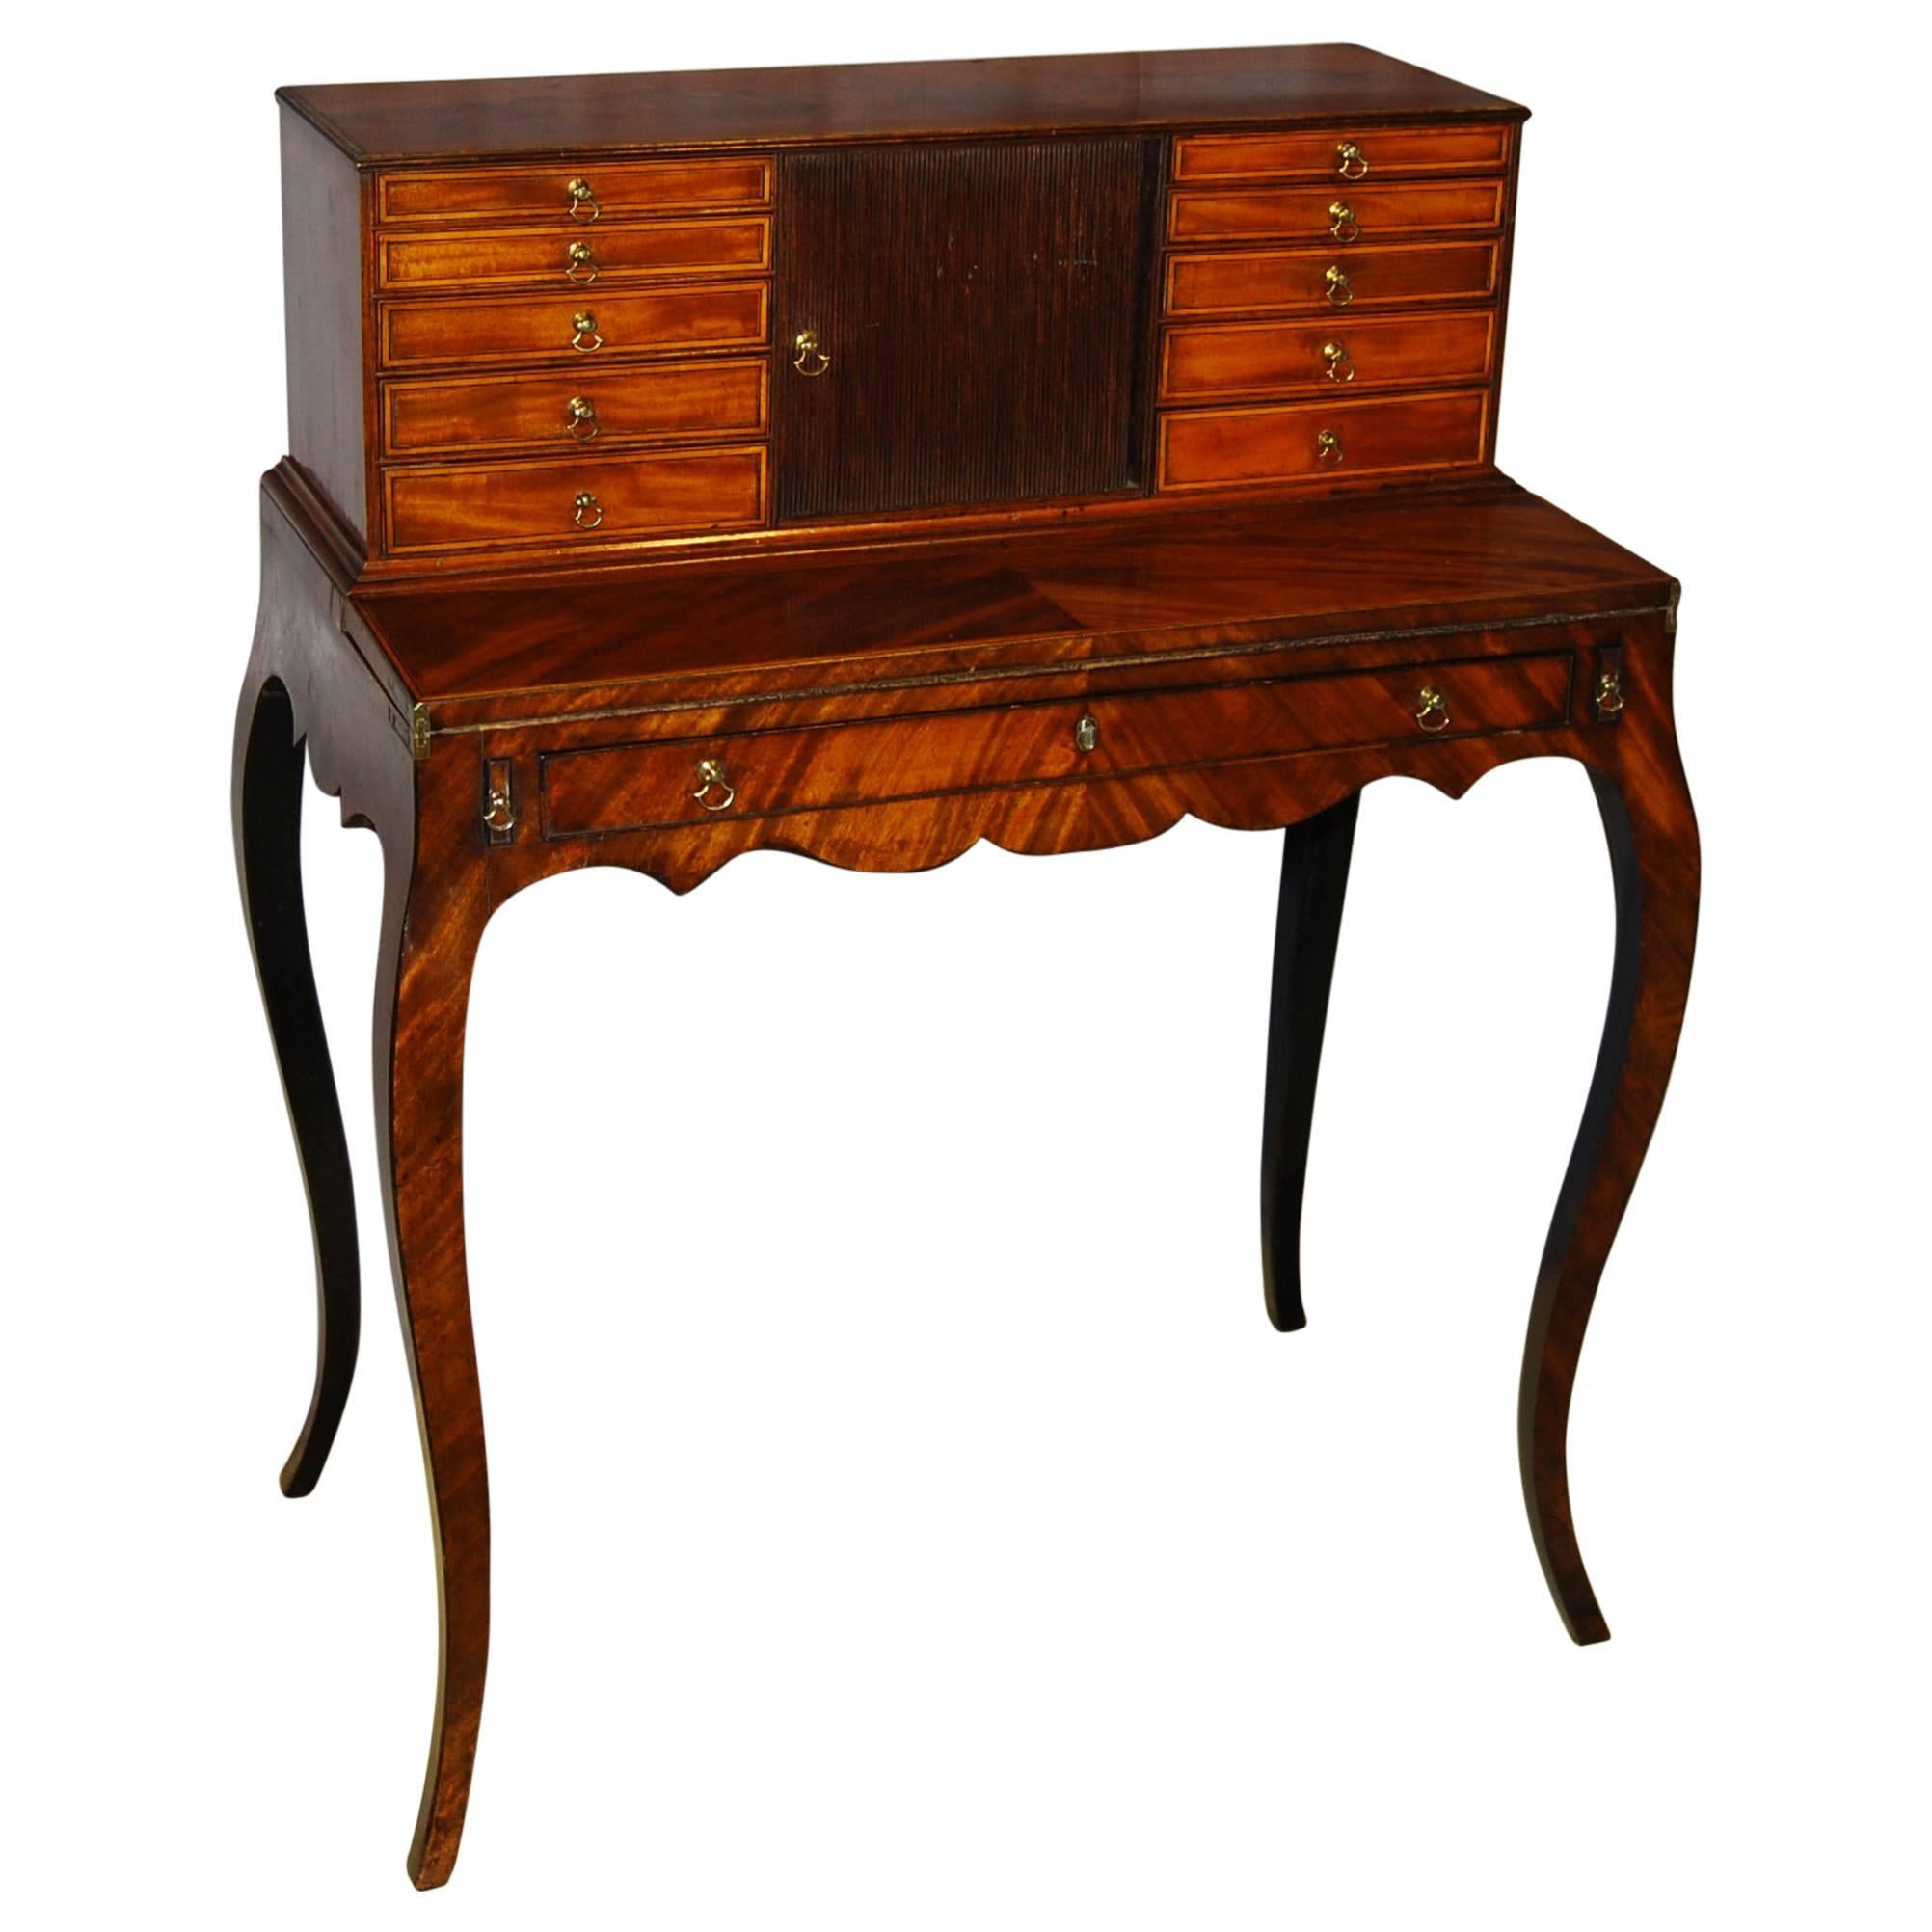 George III Period Mahogany and Inlaid Bonheur du Jour For Sale